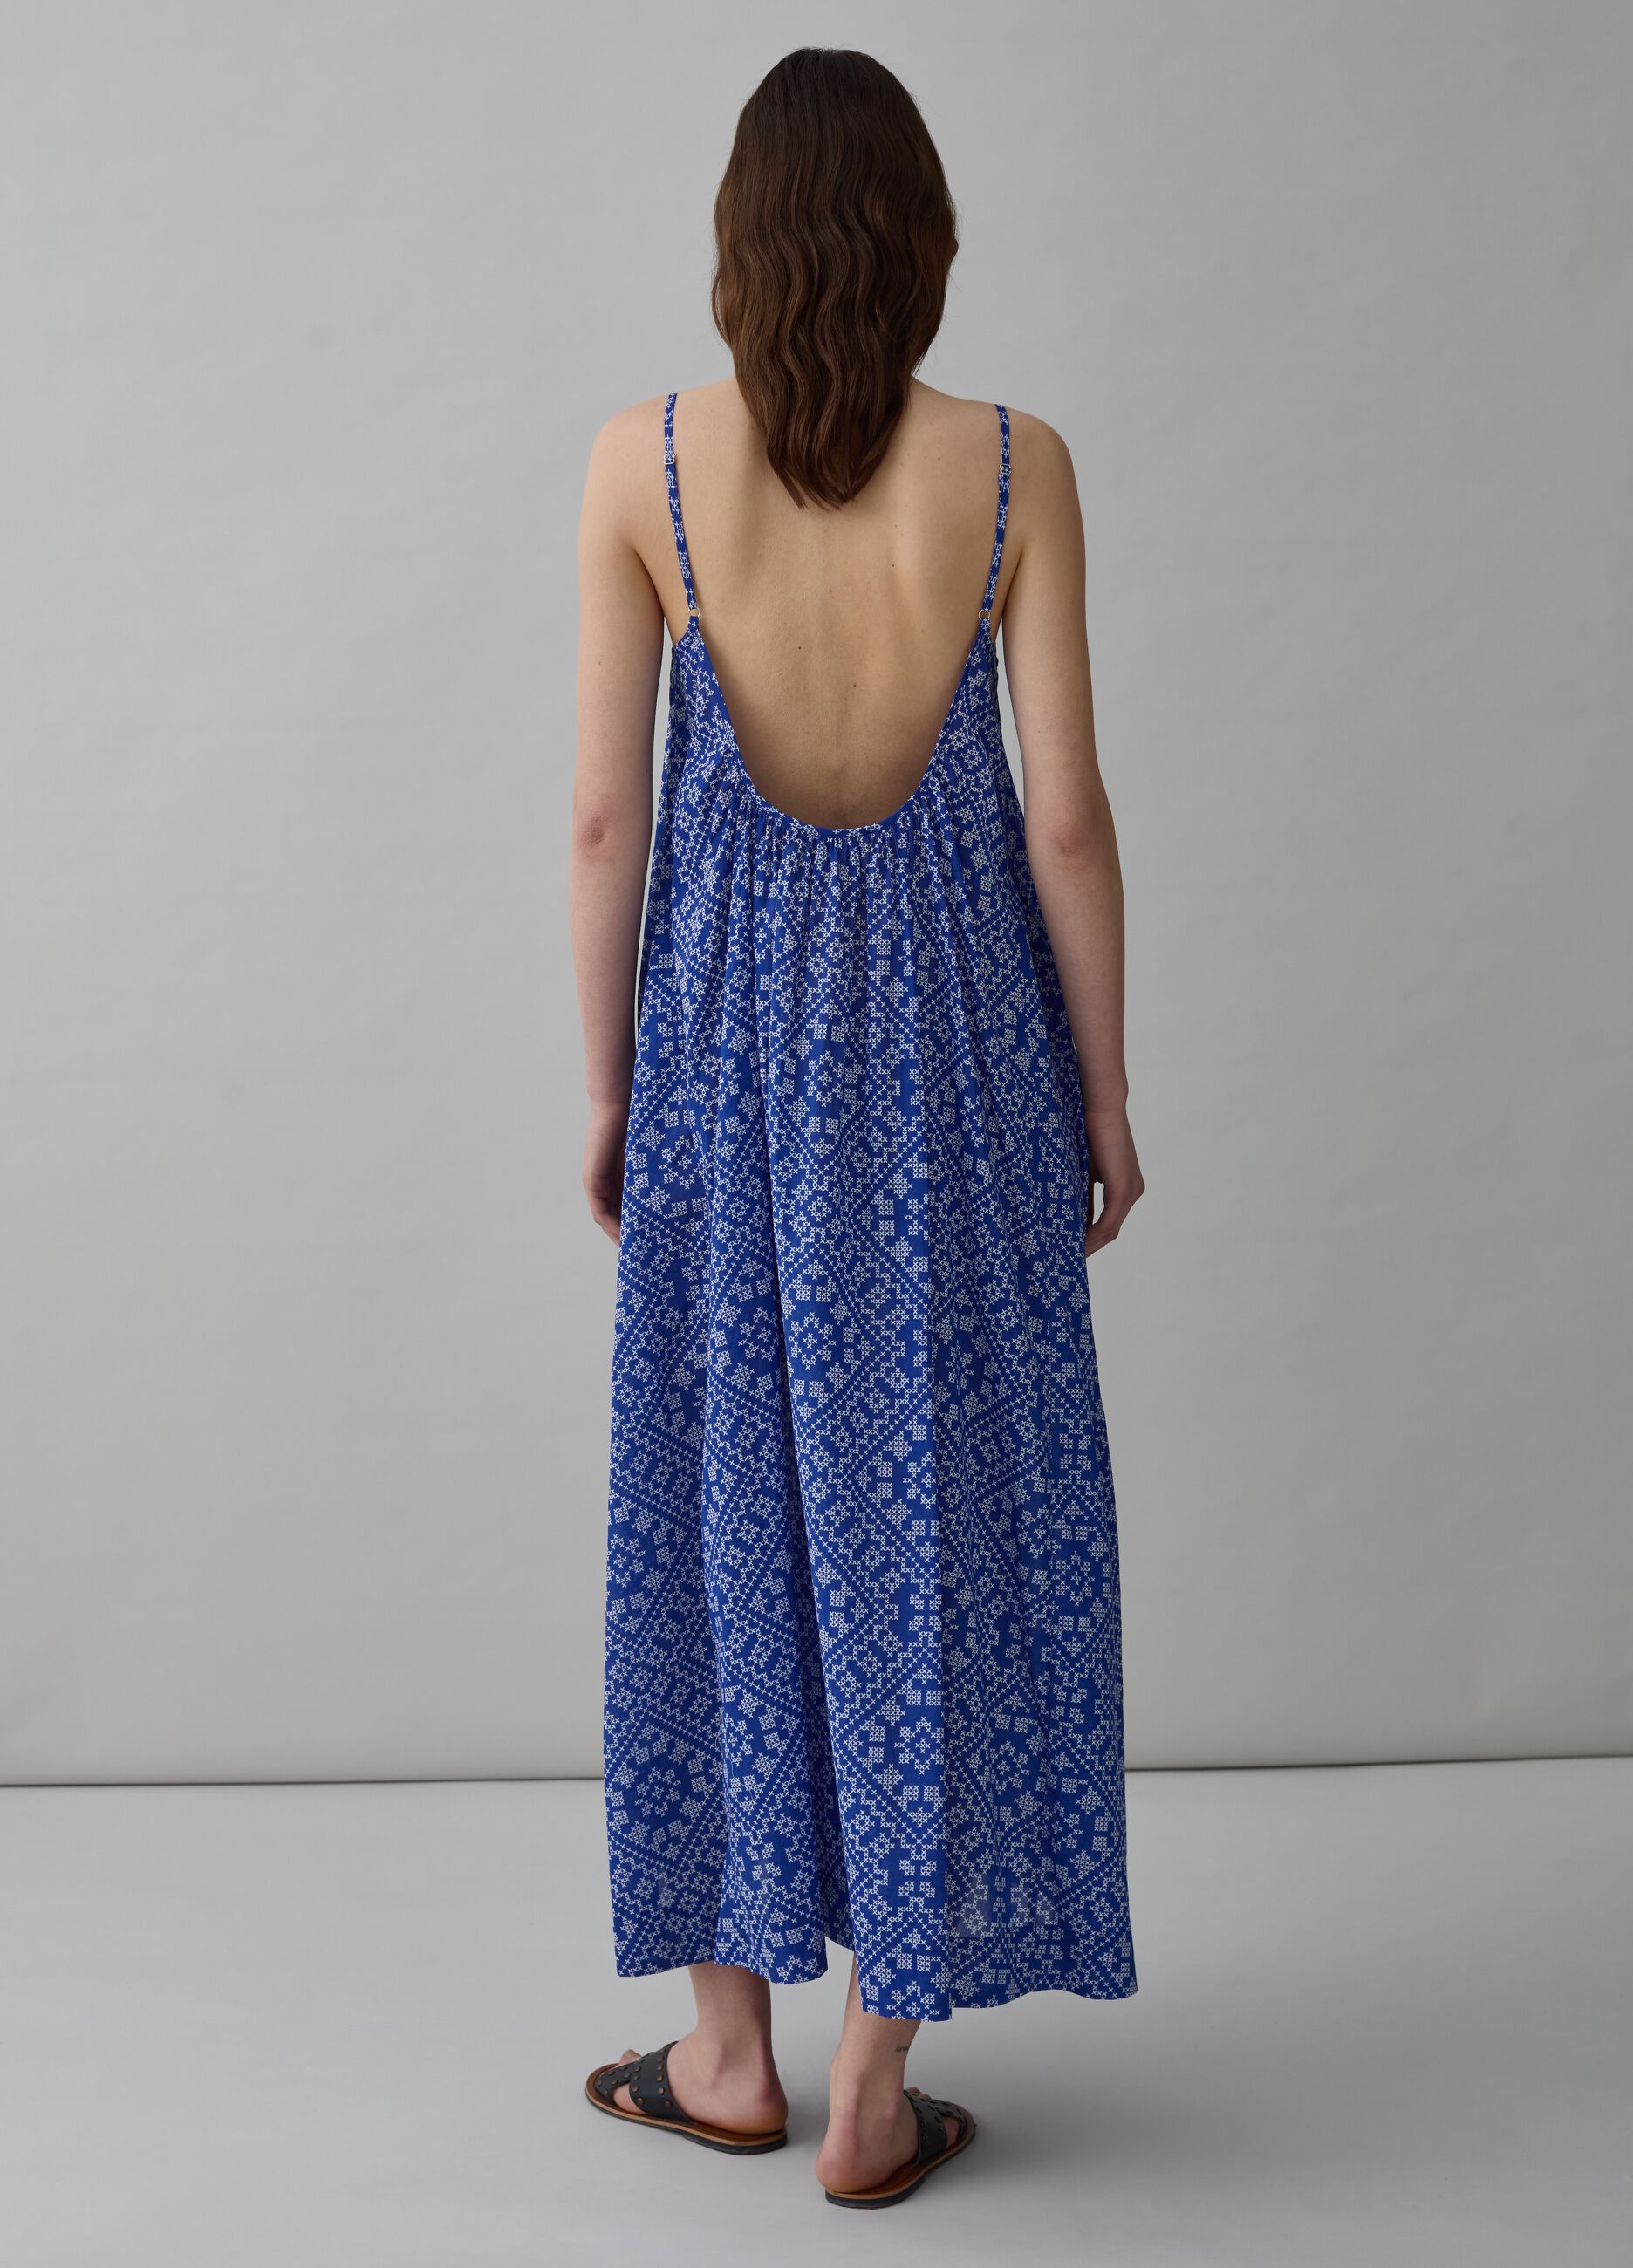 Long printed dress with bare back